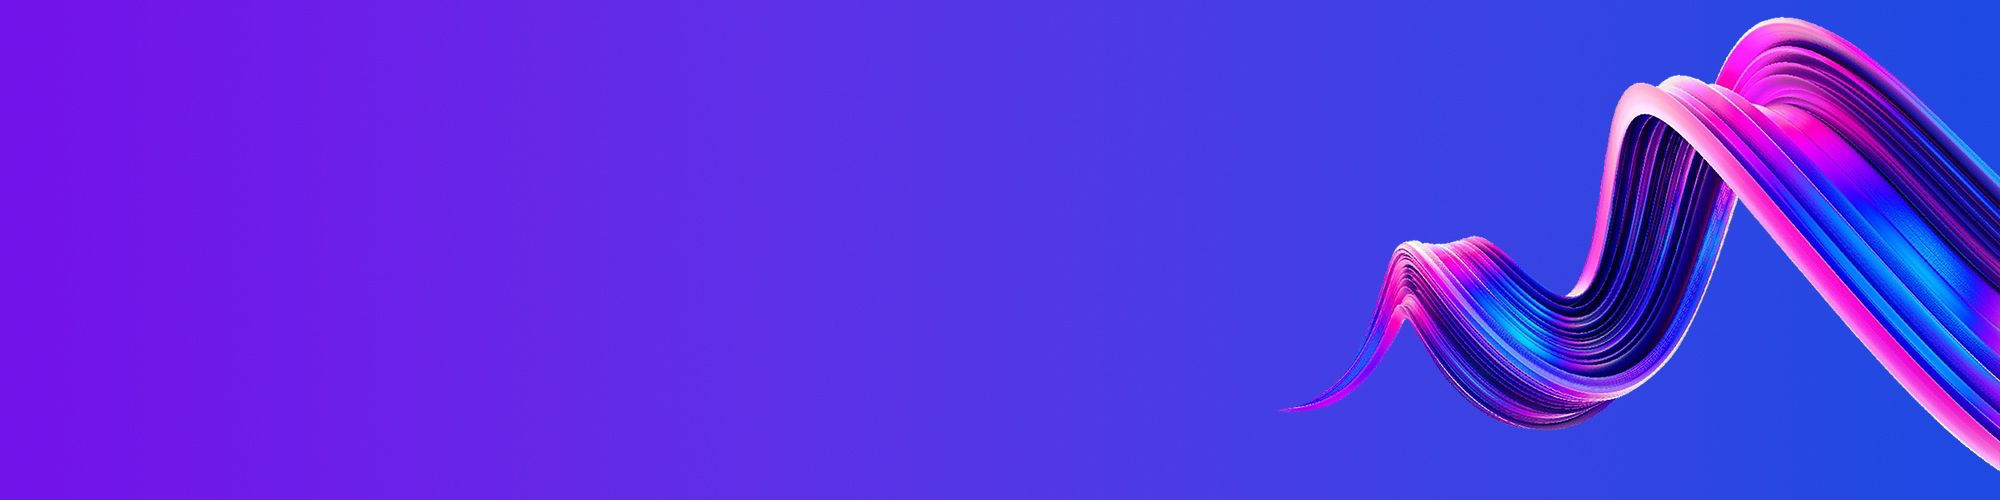 Abstract pink and purple swirl on purple and blue gradient background